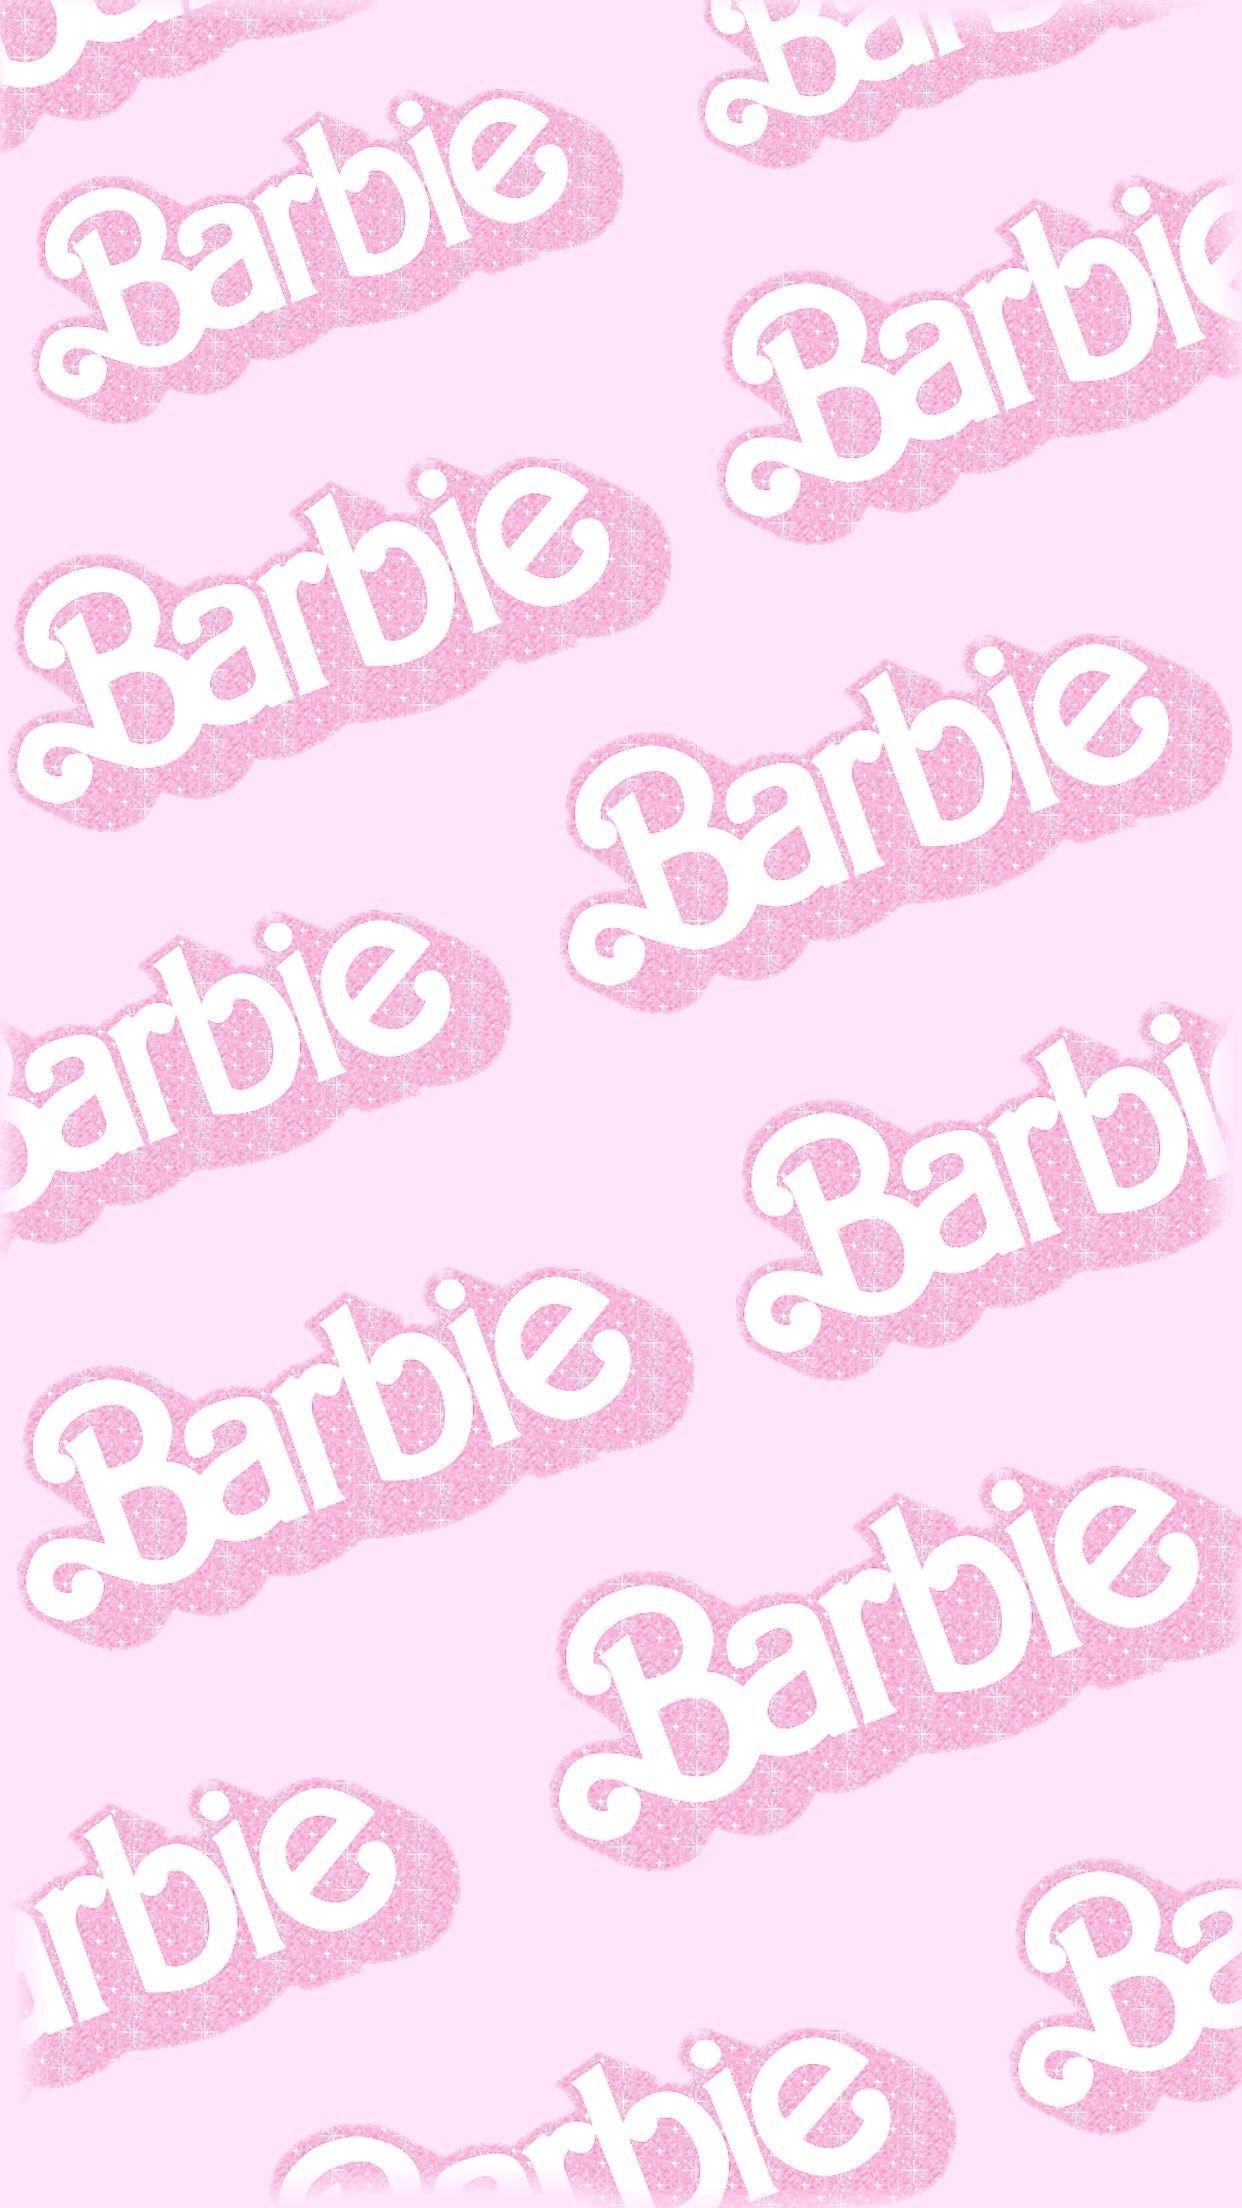 Barbie Wallpapers For Iphone  Wallpaper Cave